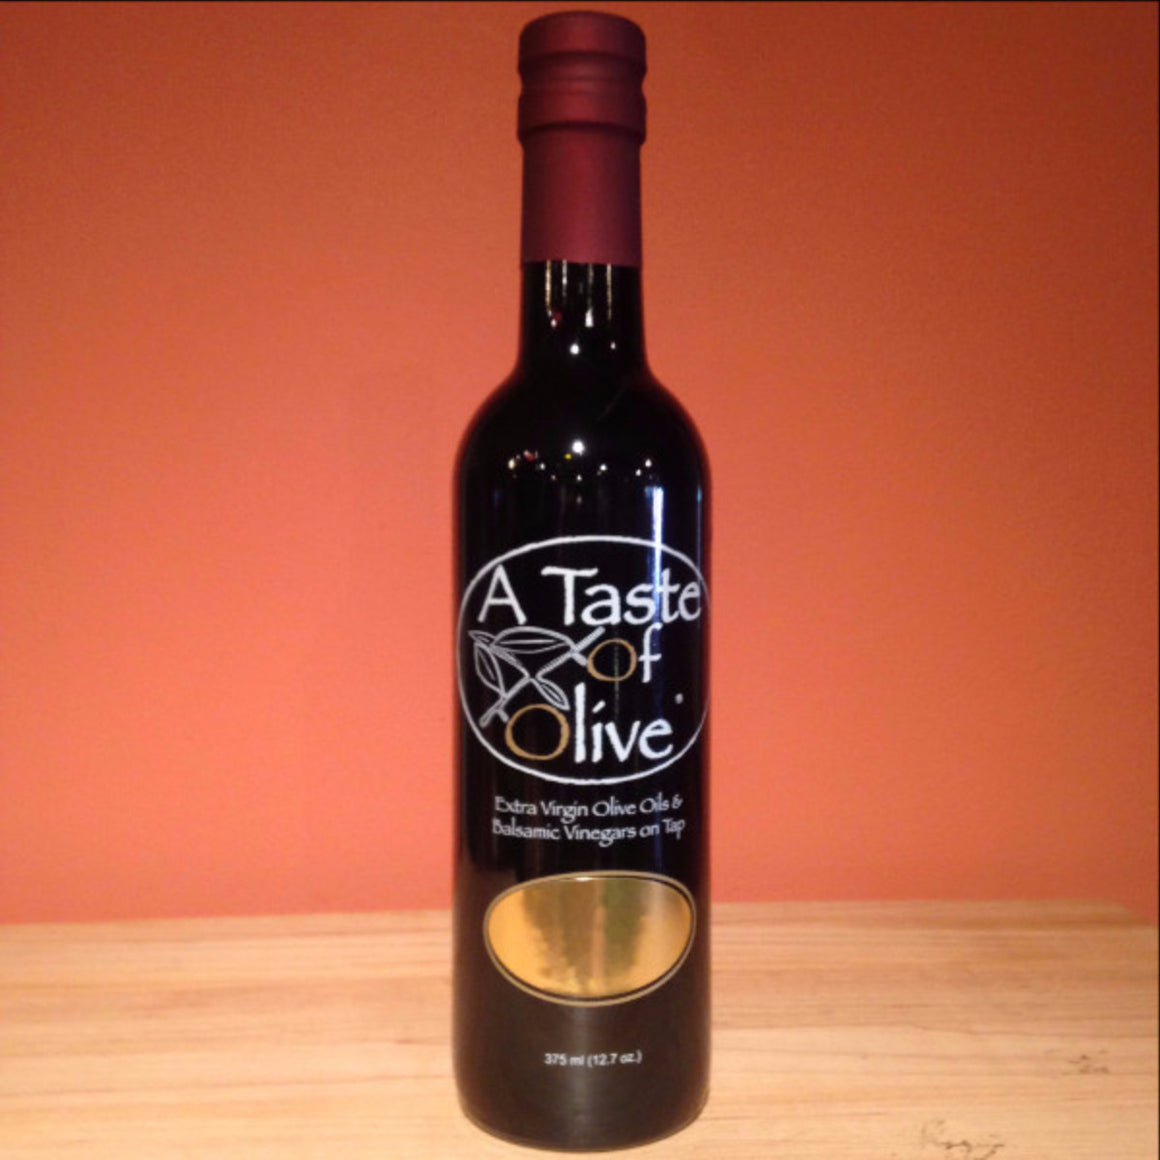 L'Acetaia Spesso Traditional Balsamic Vinegar - A Taste of Olive